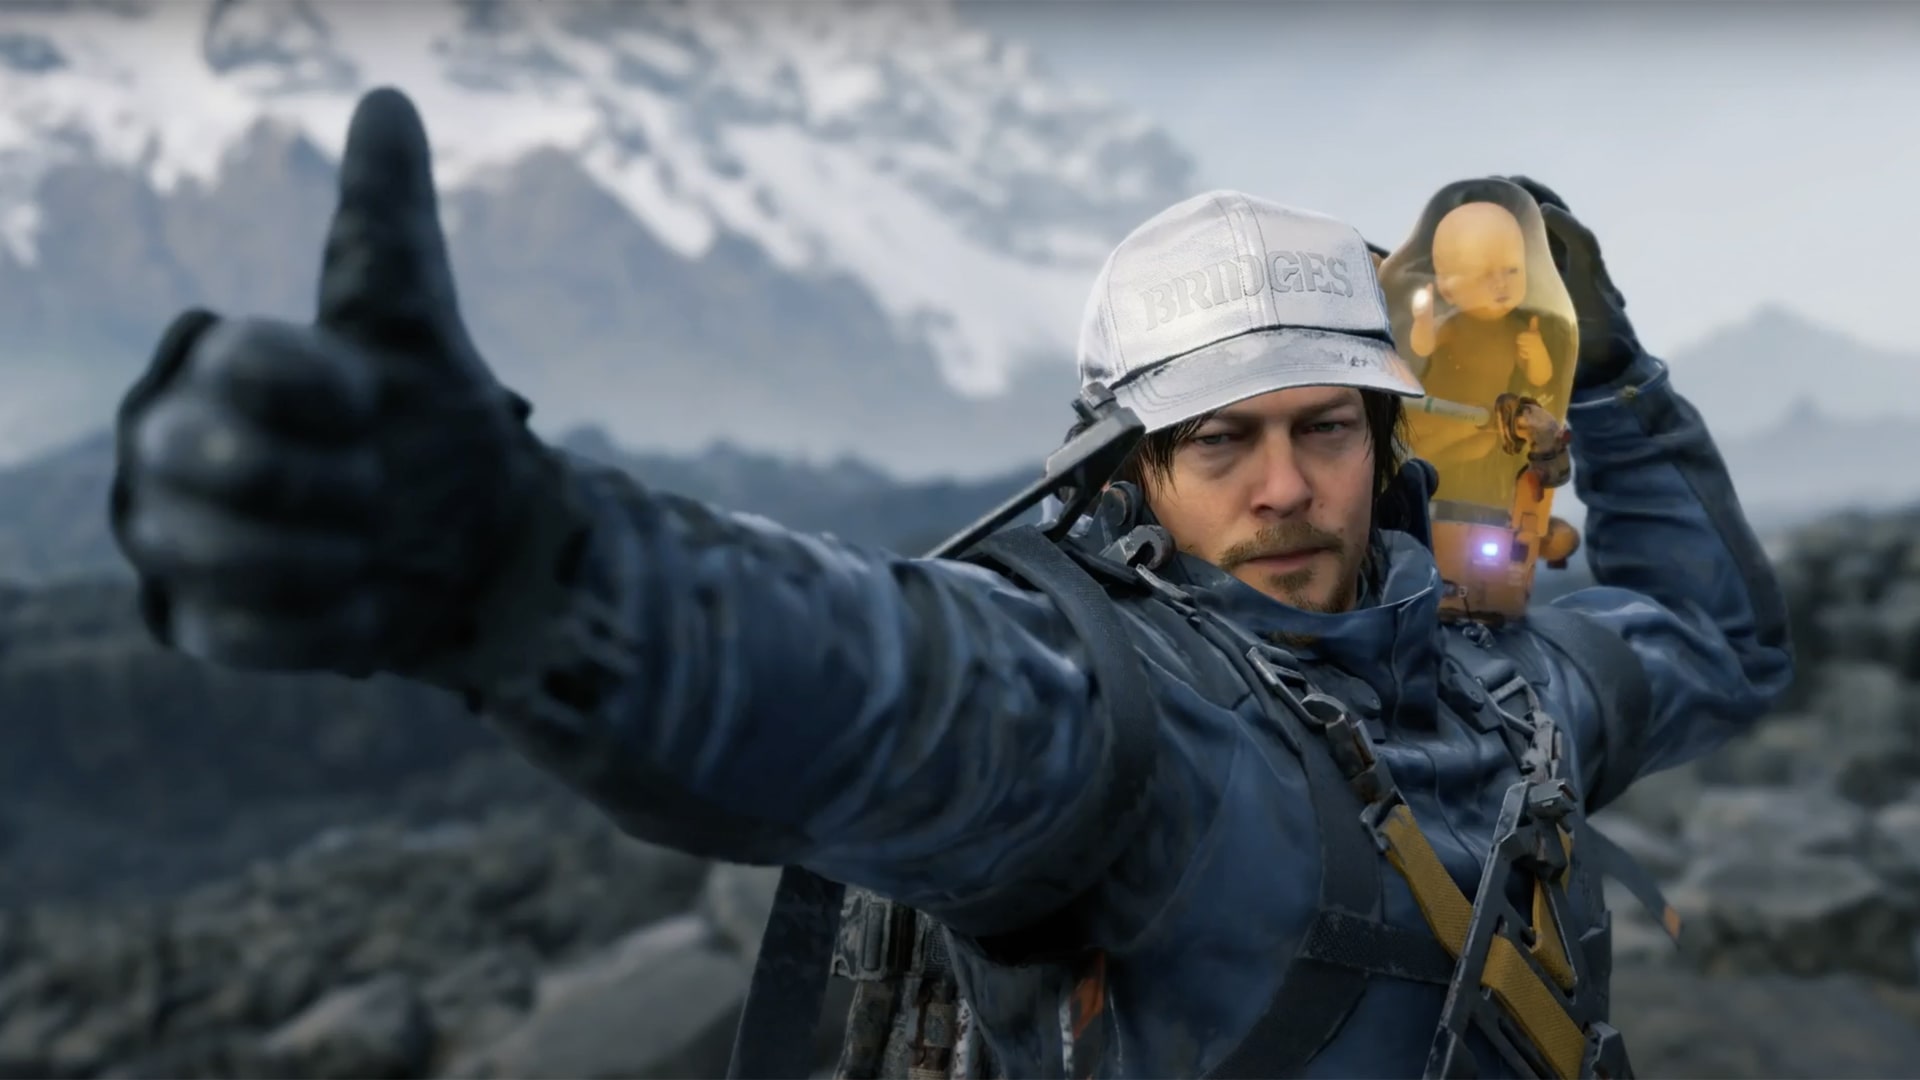 Norman Reedus giving a thumbs-up in Death Stranding